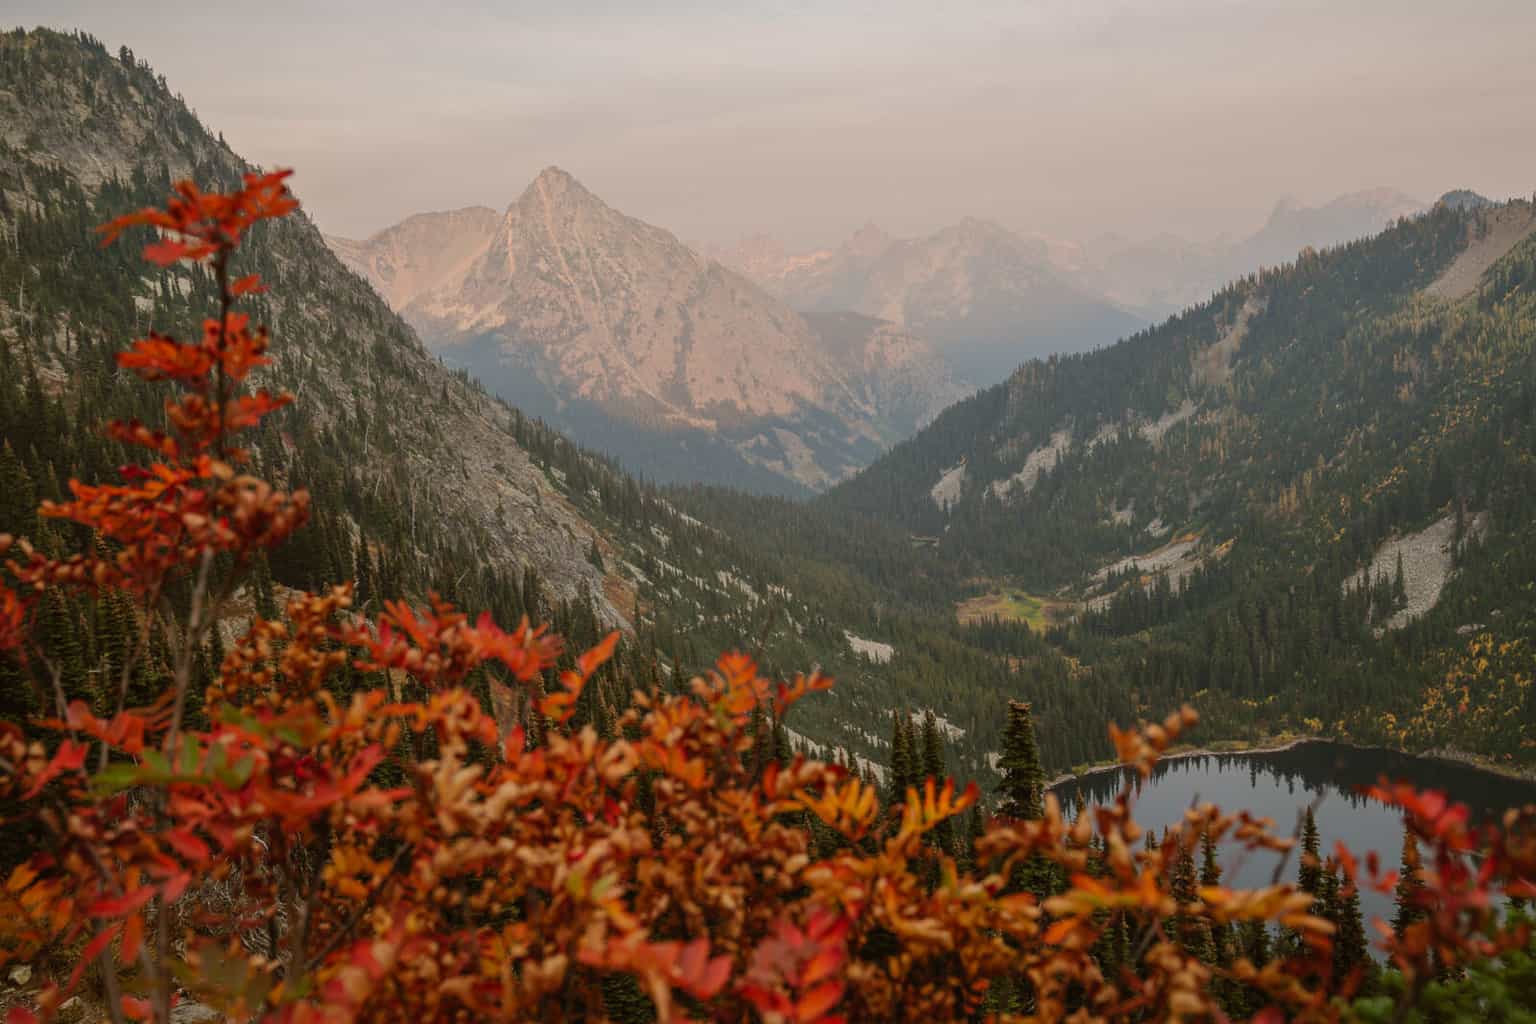 Eloping in North Cascades National Park during wildfire season